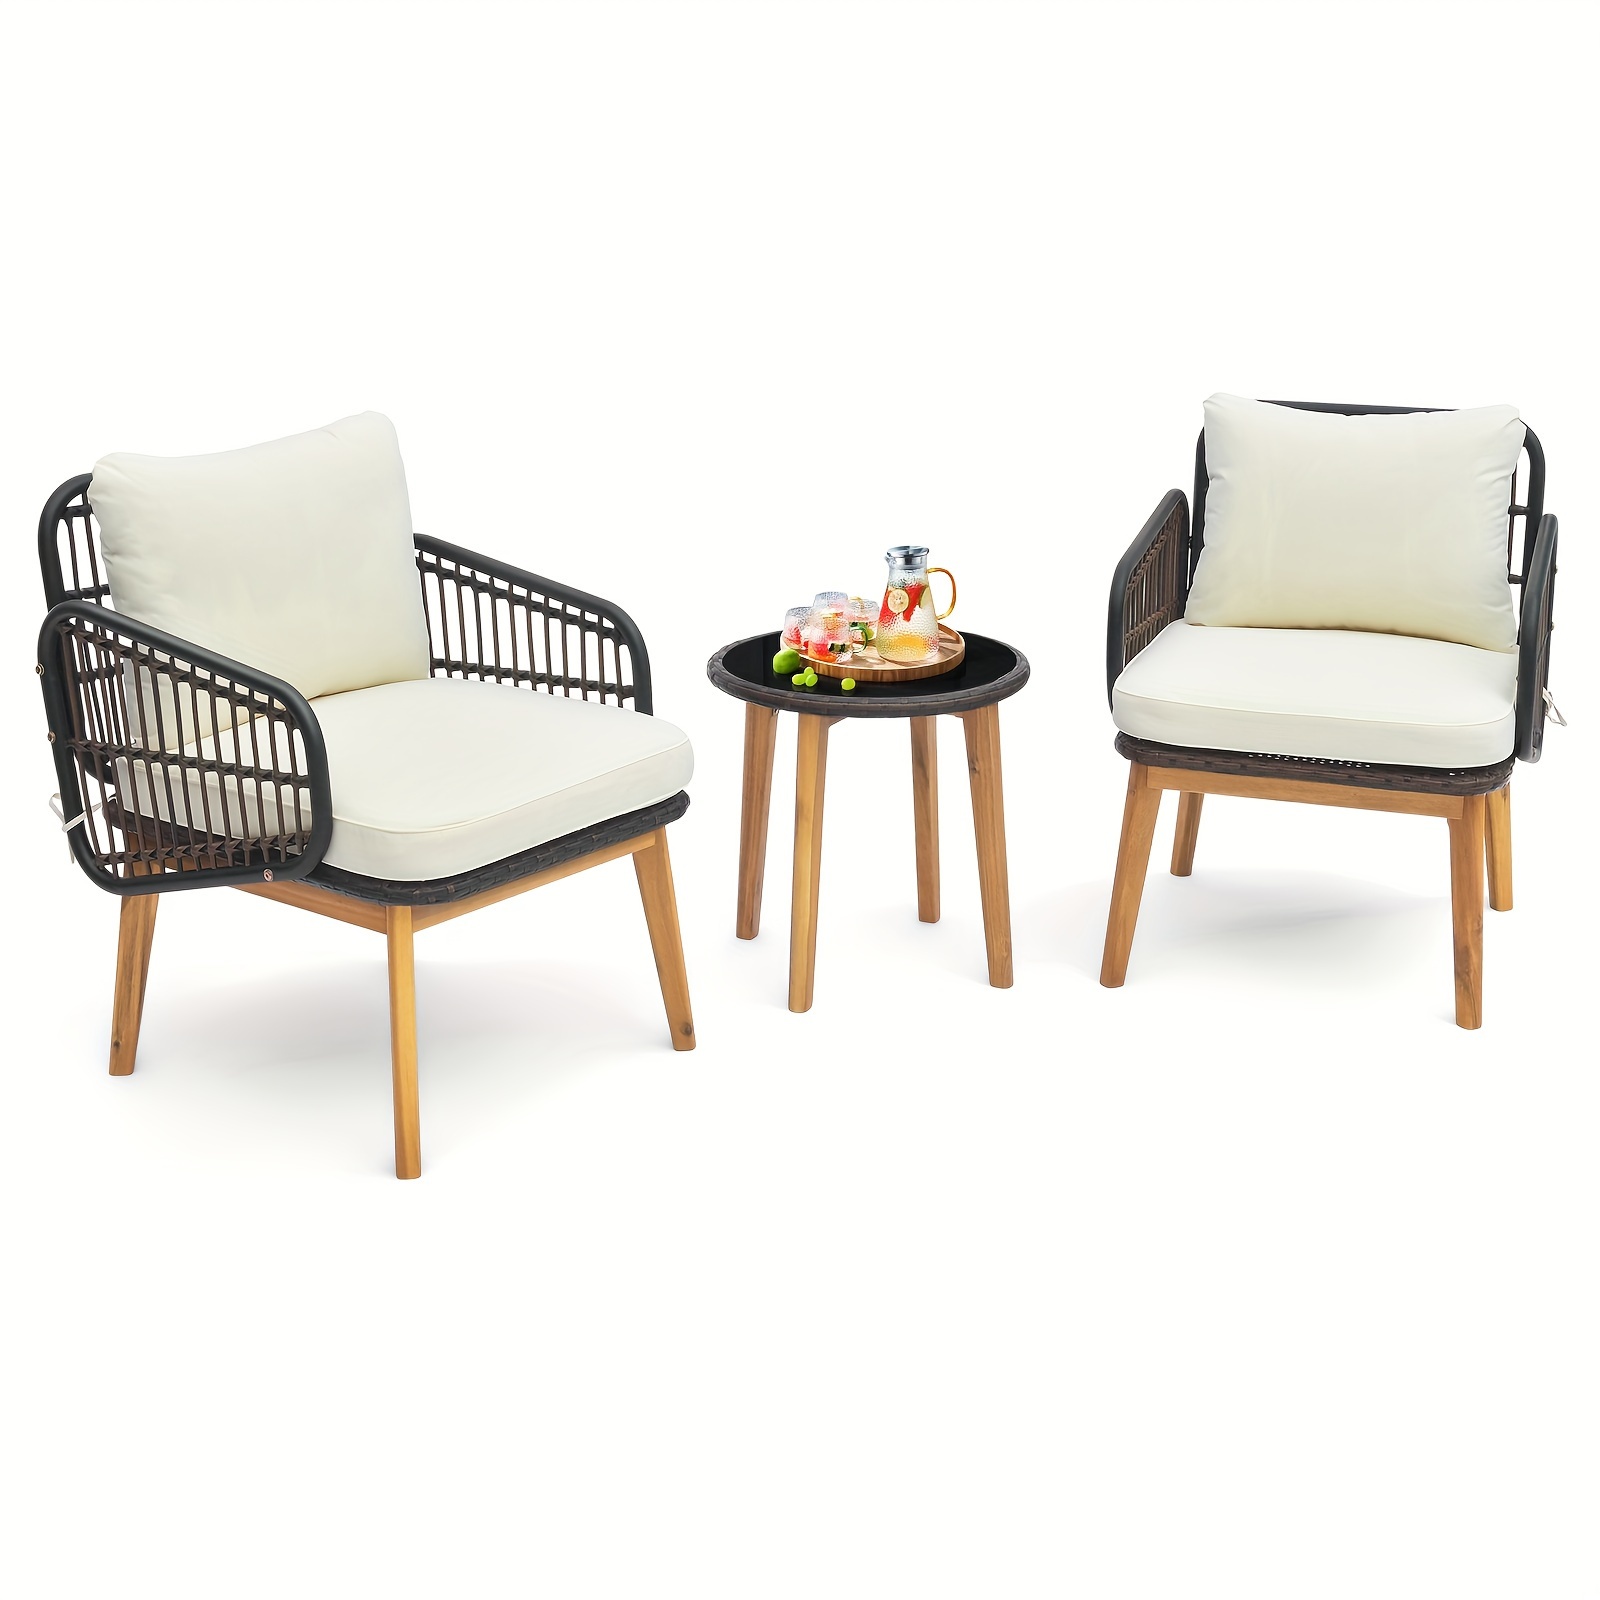 

3pcs Patio Furniture Set With Rattan Wicker Chairs, Cushioned Seating & Tempered Glass Top Side Table, Outdoor Conversation Set For Garden, Balcony, Deck, Supports Up To 400lbs - Weather Resistant